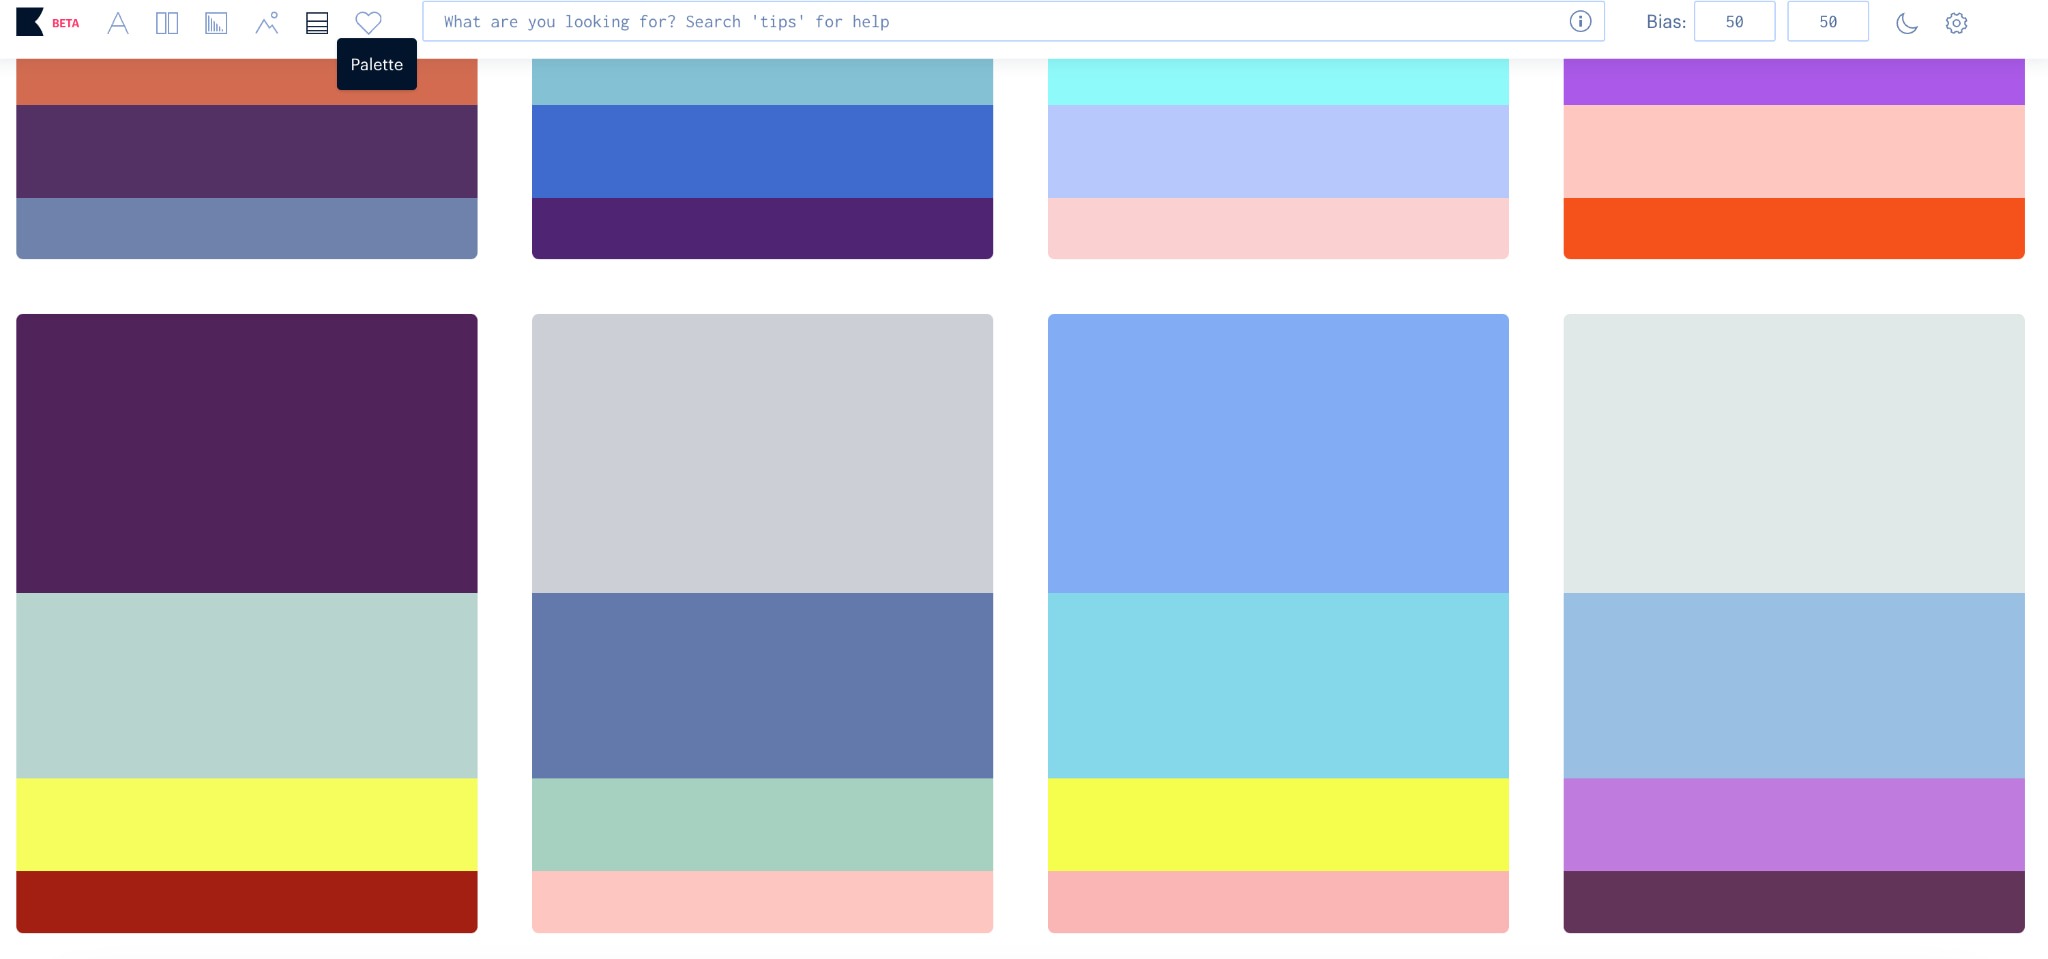 A screenshot from Khroma's palette search 